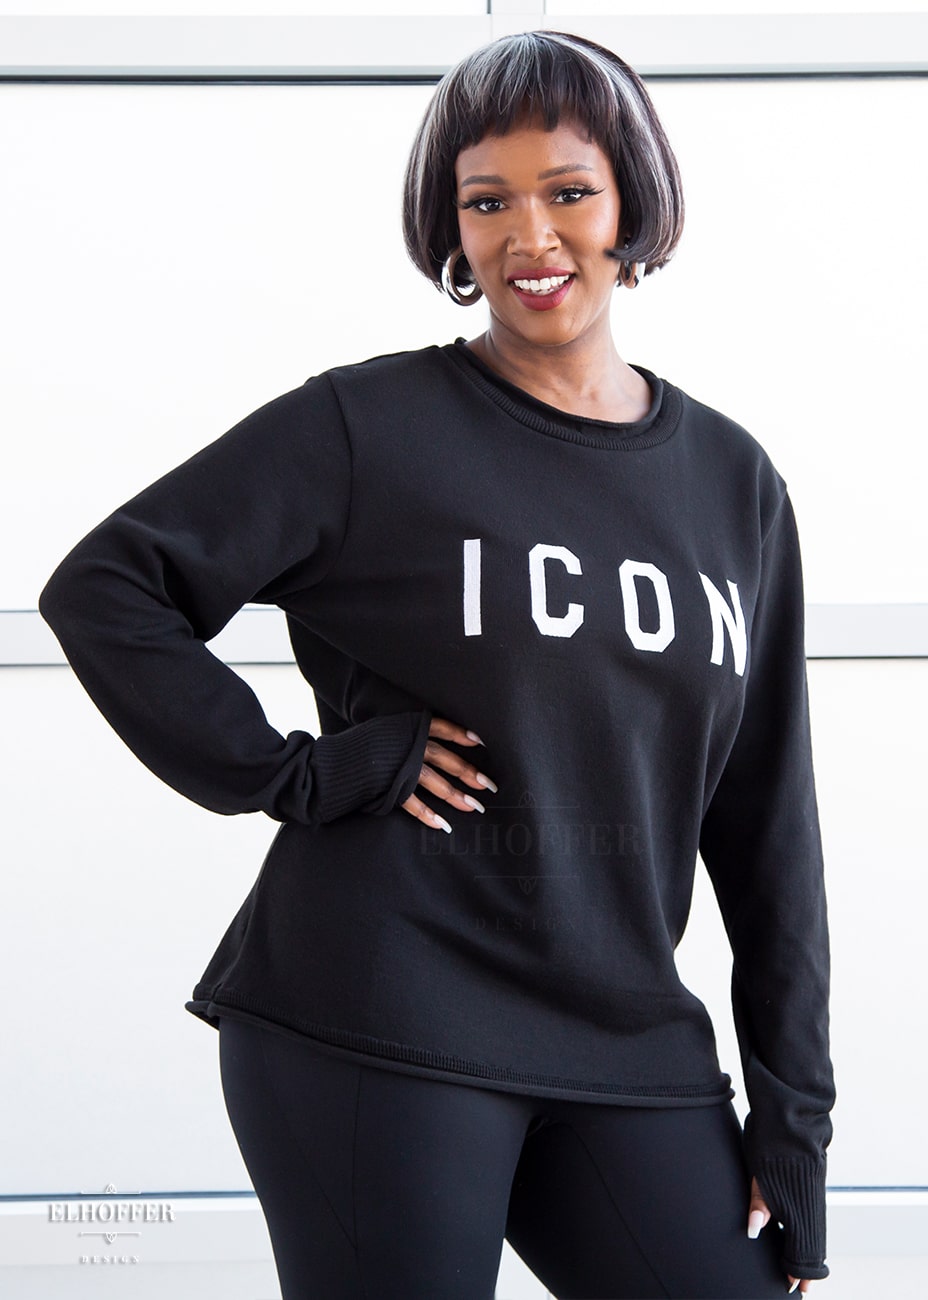 Lynsi, a medium dark skinned M model with short black and white hair, is smiling while wearing an XL sample of black unisex sweater with white bold embroidered letters that spell ICON and has long sleeves with thumbholes. The sweater also has a rolled hem on both the neckline and around the cuffs. The XL sample makes the sweater look like a relaxed fit, she would normally wear a M, or a S if she wanted it more fitted.